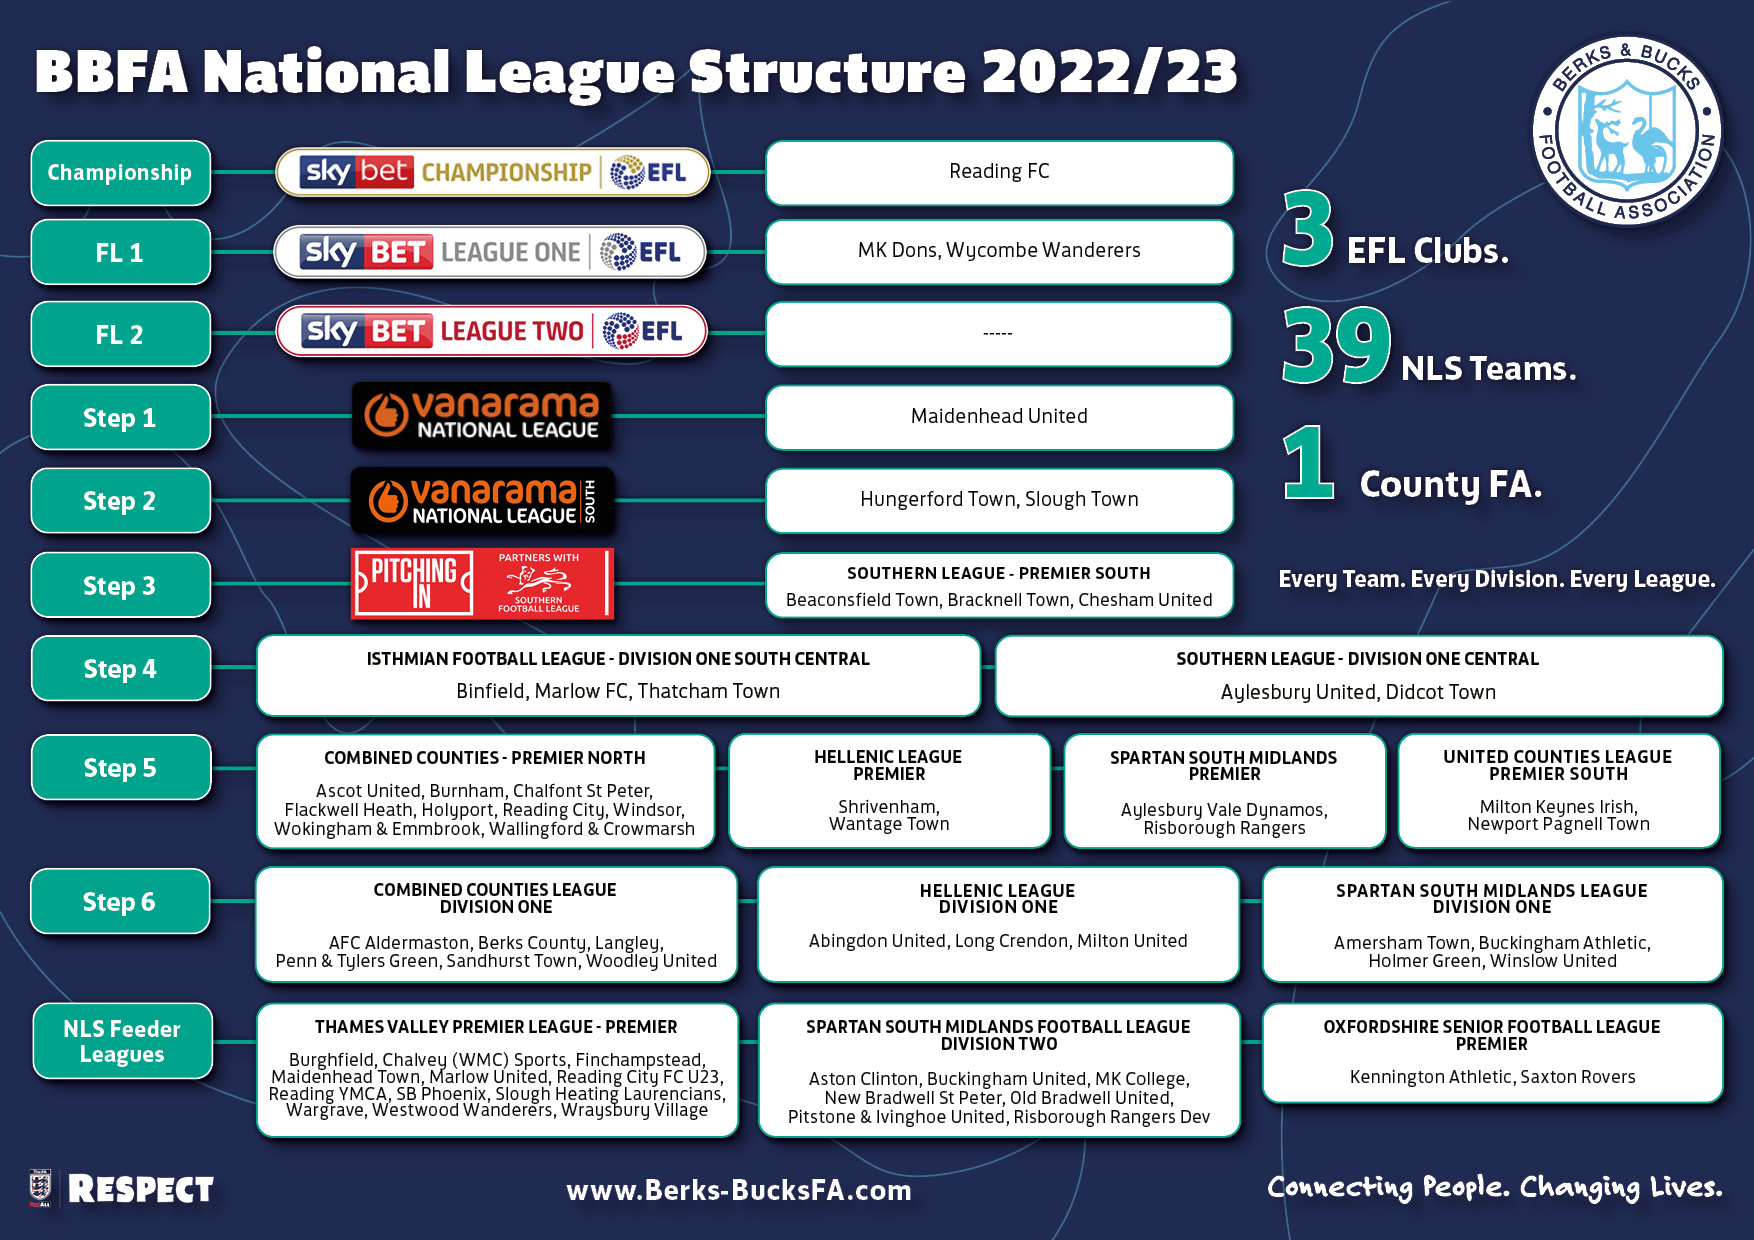 Every Berks & Bucks FA team in the every league and every division of the National League Structure. Season 2022/23